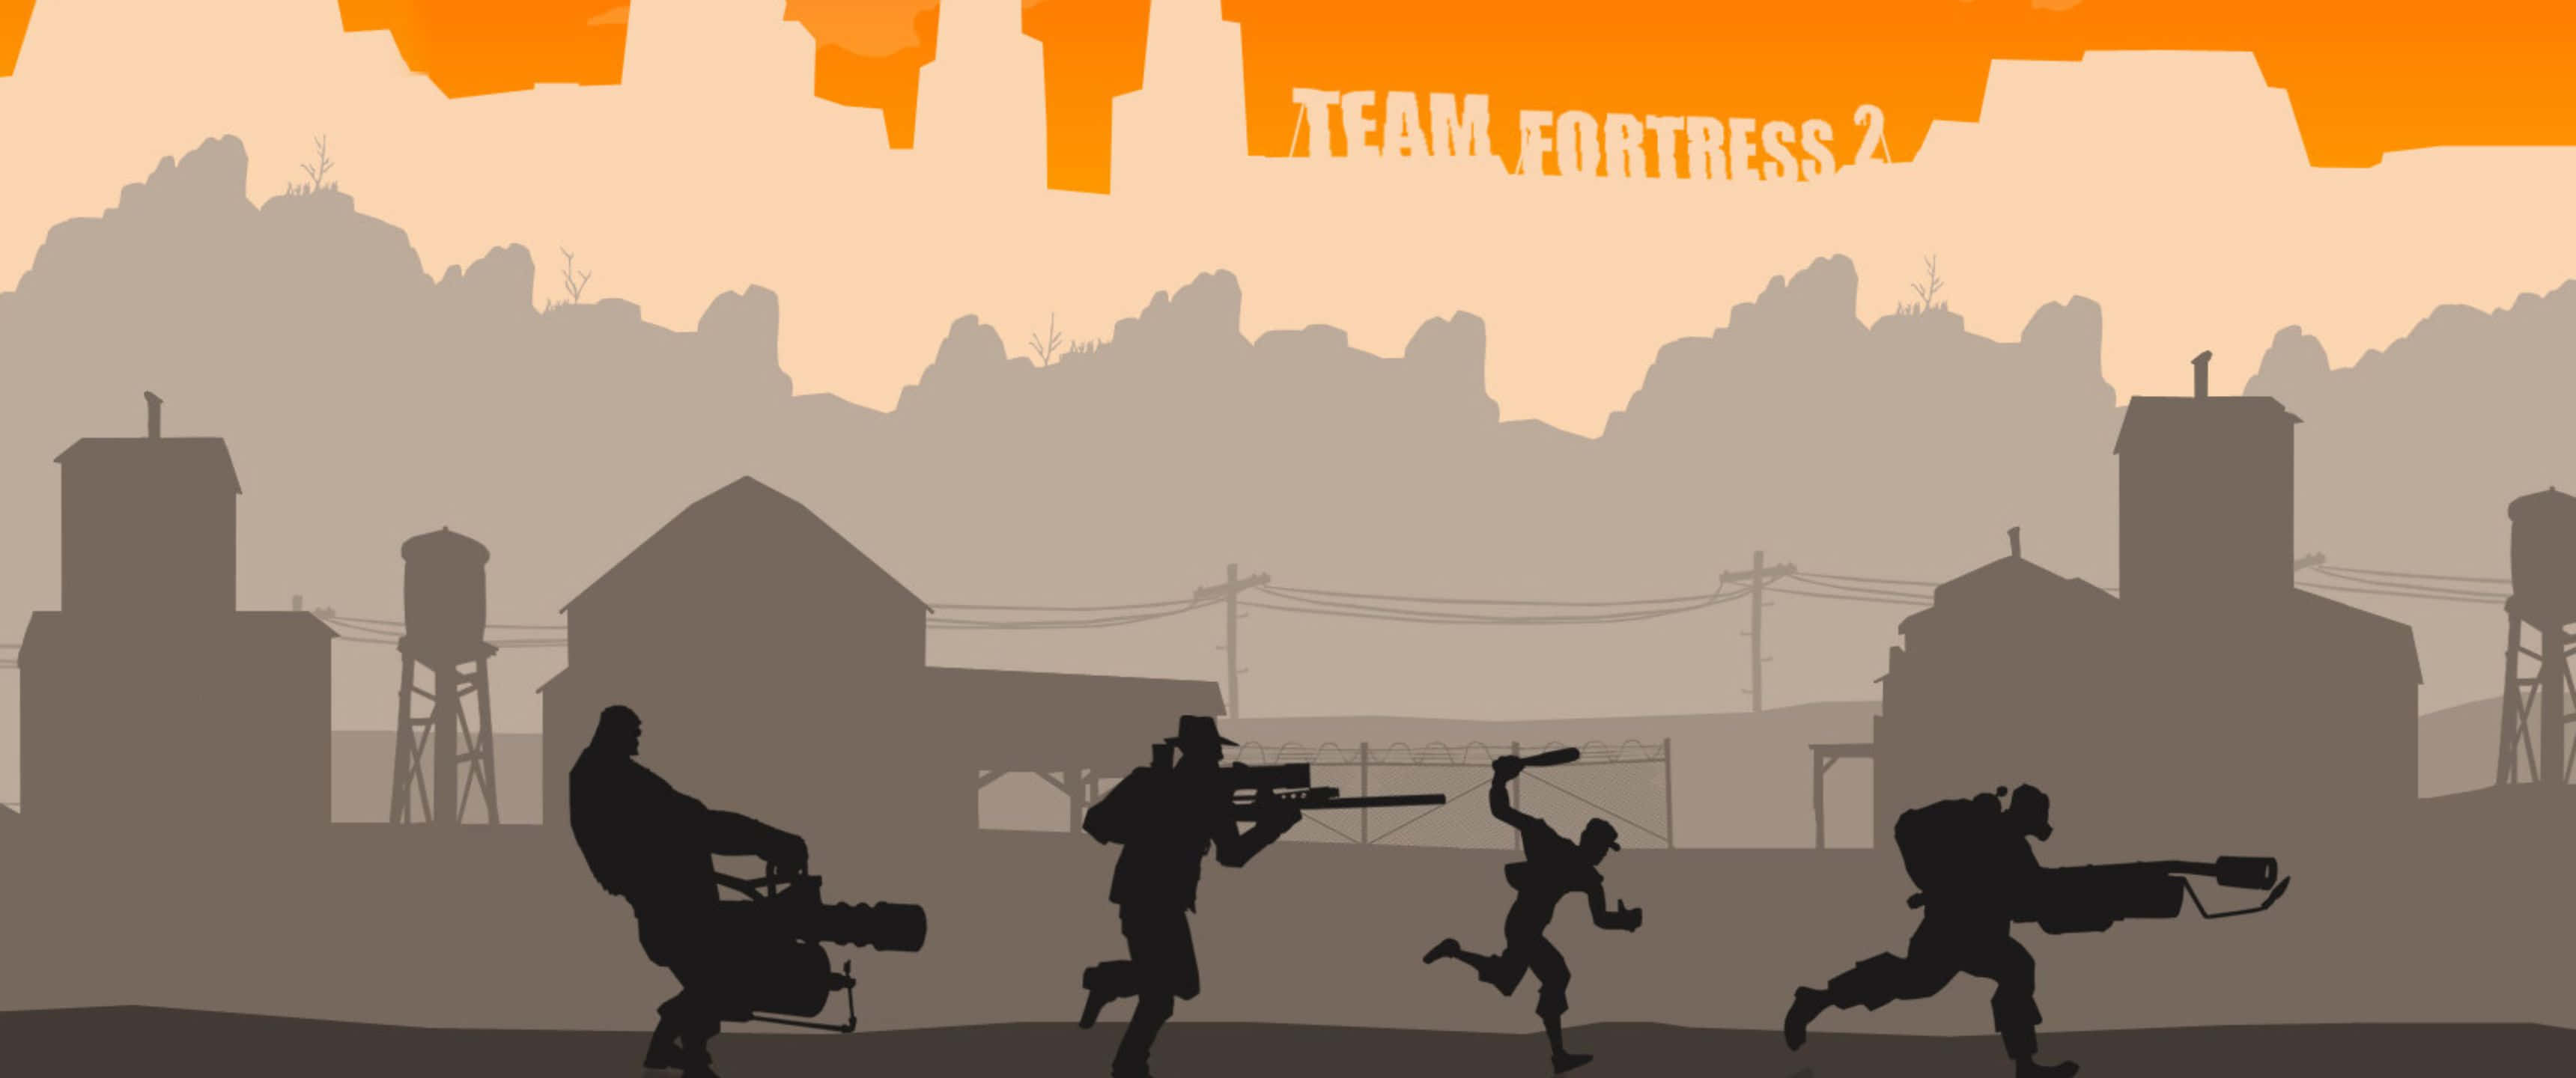 Relive the Classic TF2 Experience in Immersive 3440x1440p High Definition